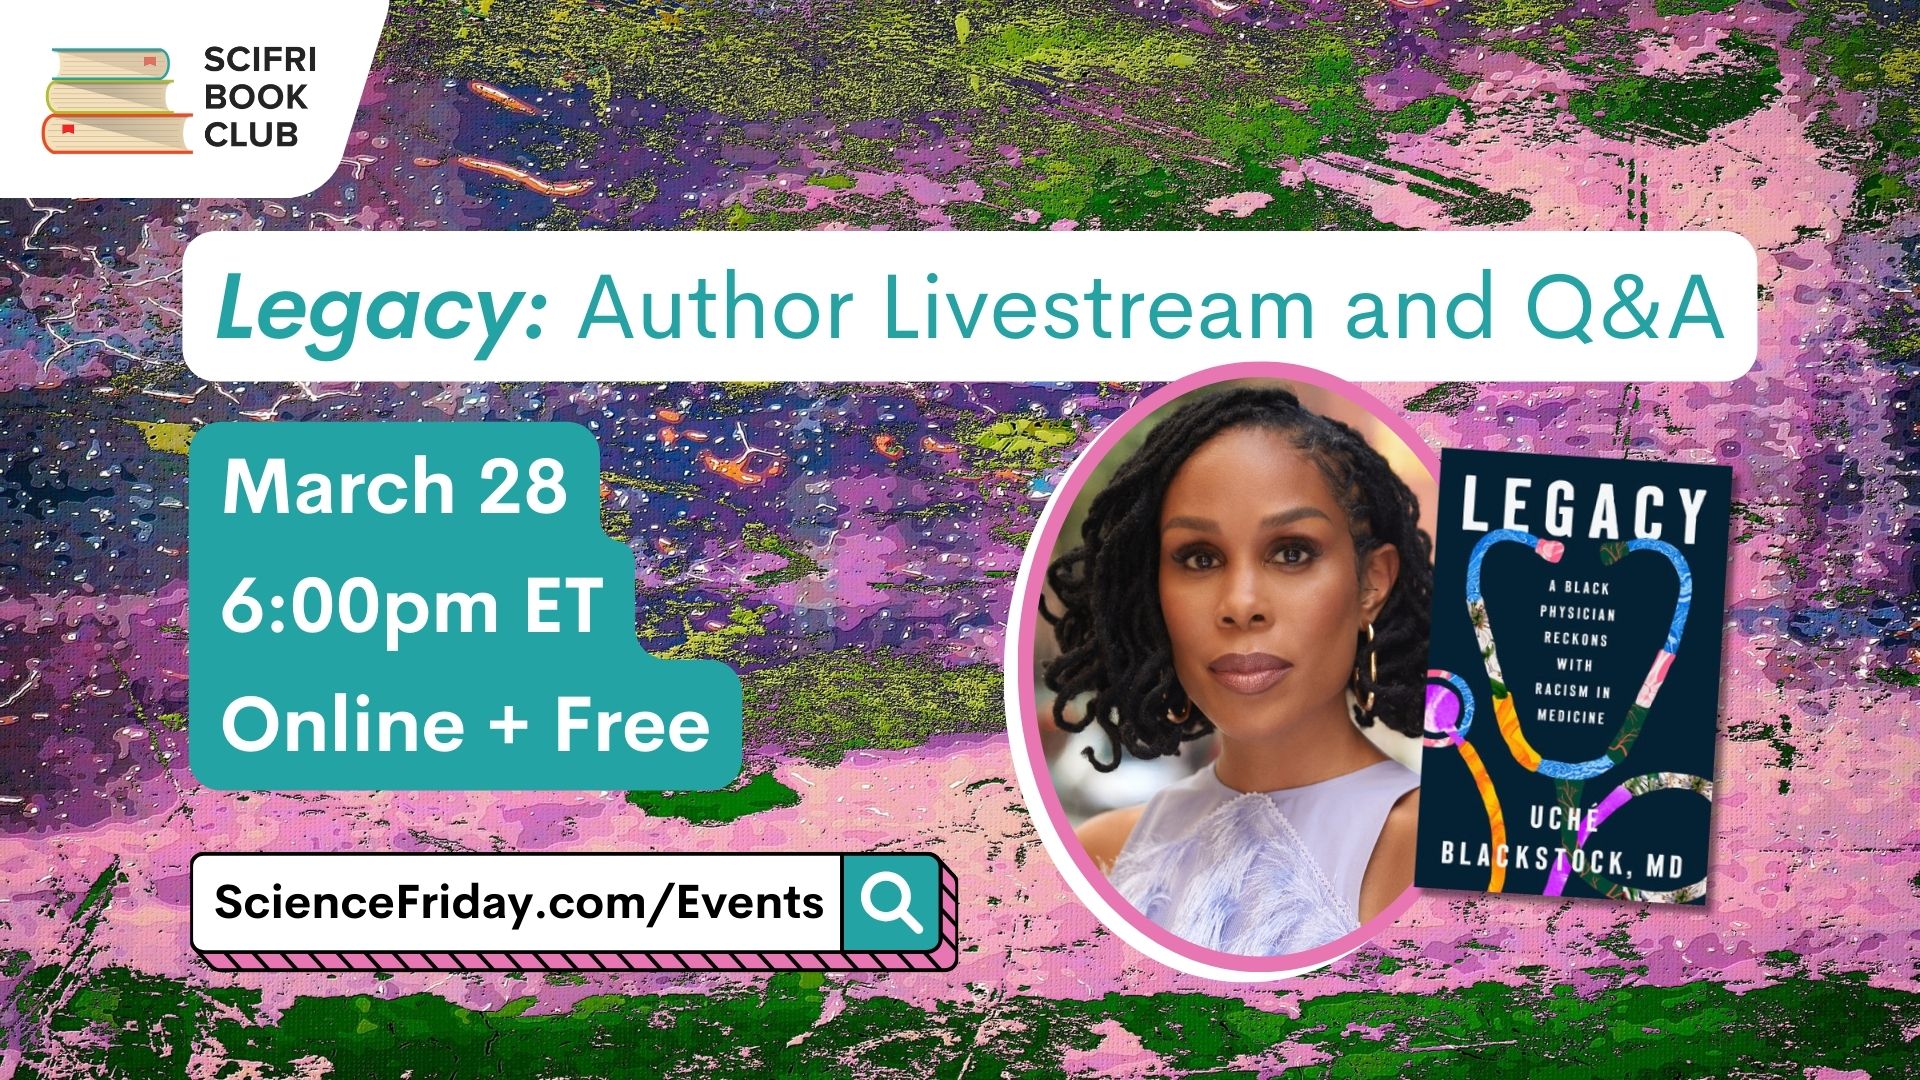 Event promotional image. In the top left corner, SciFri Book Club logo, with event info below, which reads: "Legacy: Author Livestream and Q&A. March 28, 6:00pm ET, Online + Free, ScienceFriday.com/Events." The middle features the book cover of LEGACY by Uche Blackstock, and headshot the author, a Black woman with curled hair. The background is a pink, green and purple paint collage.